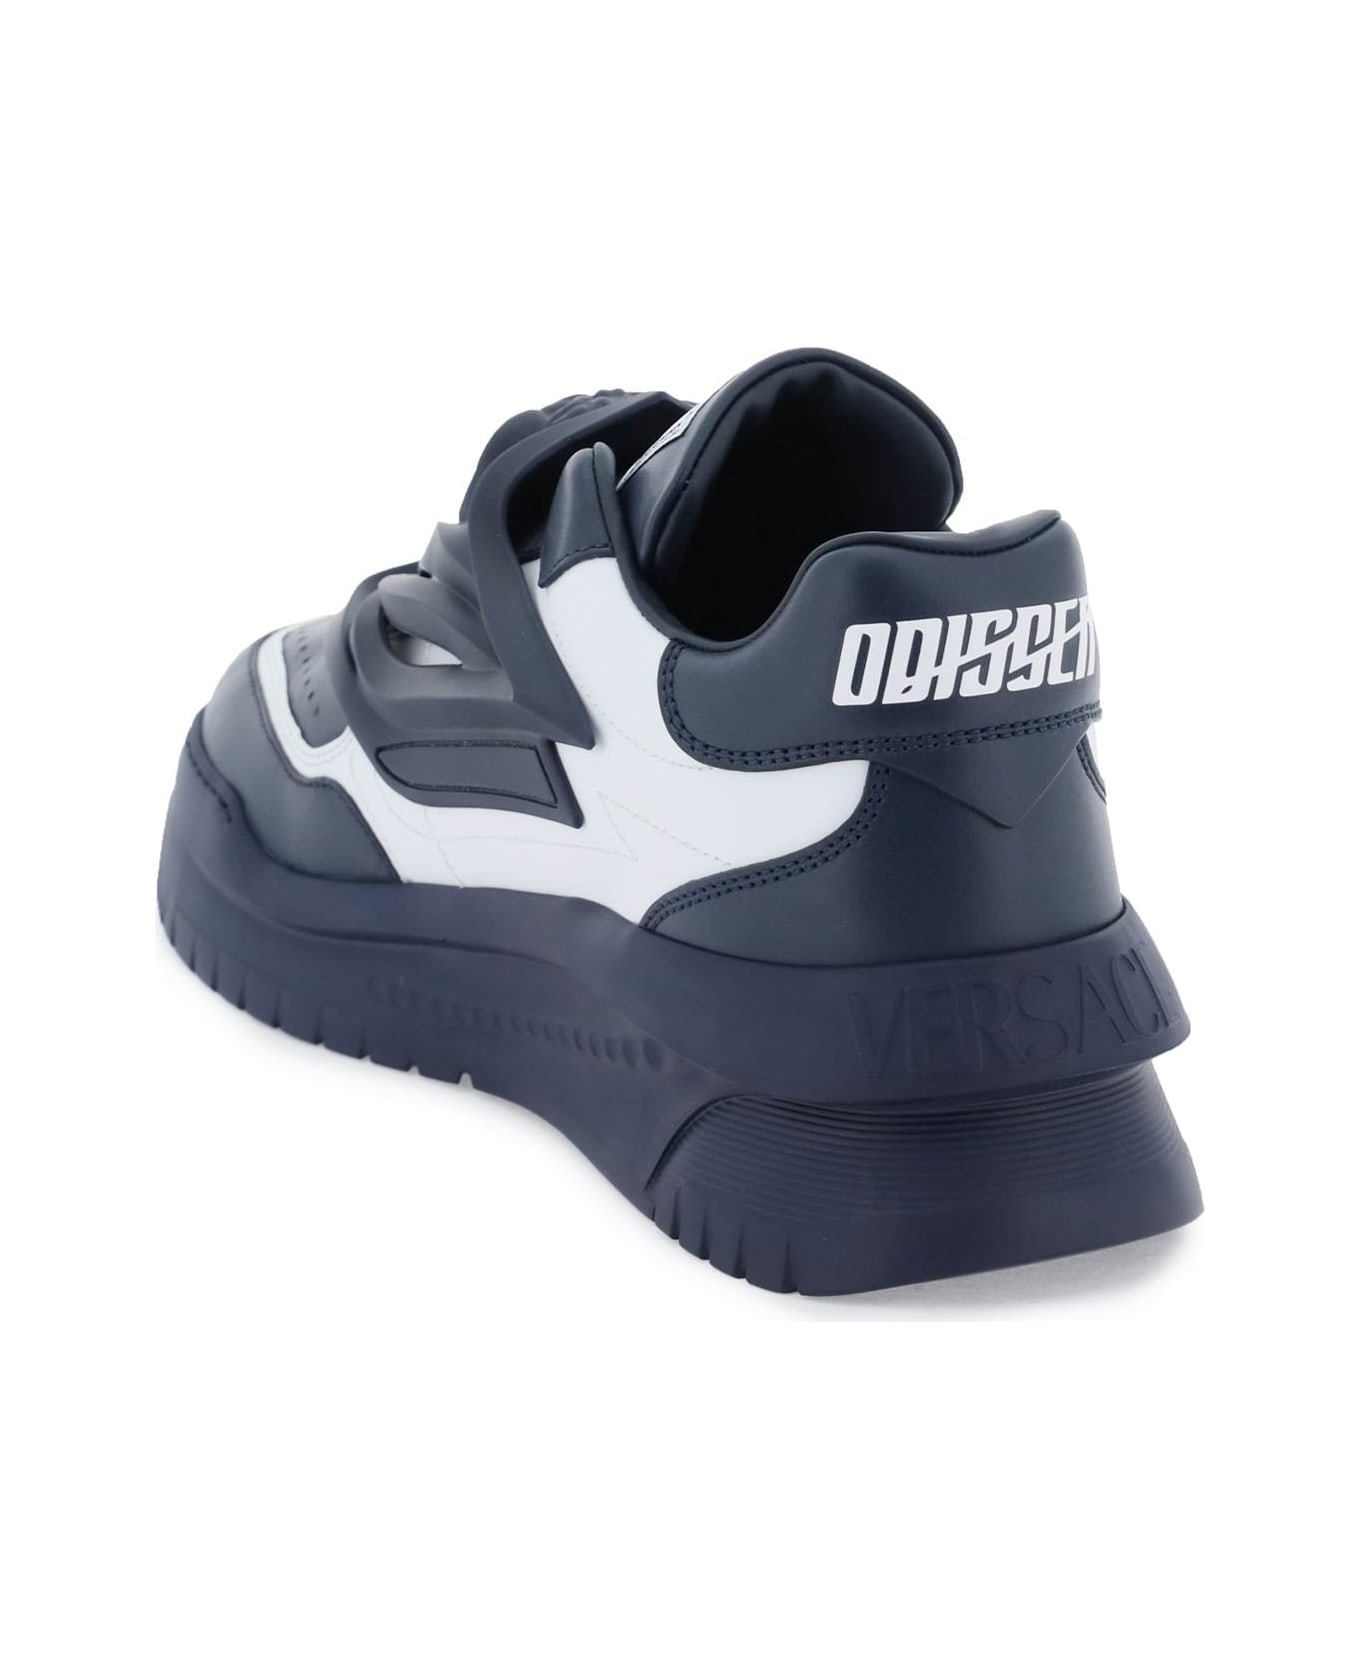 Versace Odissea Sneakers - BLUE NIGHT  WHITE (White)